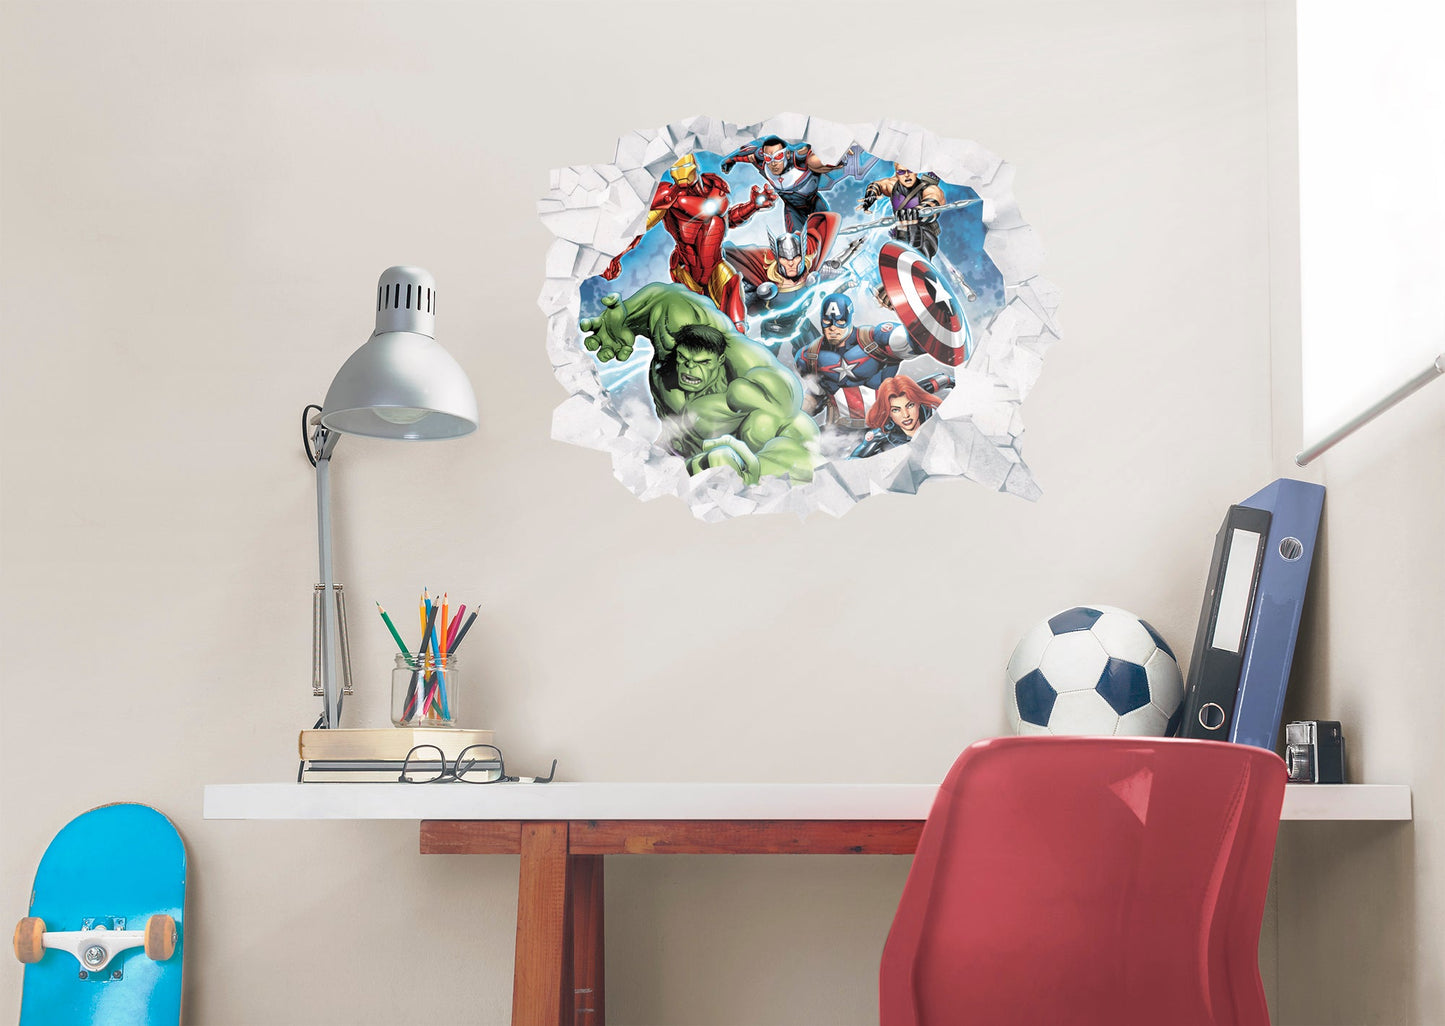 Avengers: Broken Wall 5 Instant Window - Officially Licensed Marvel Removable Adhesive Decal